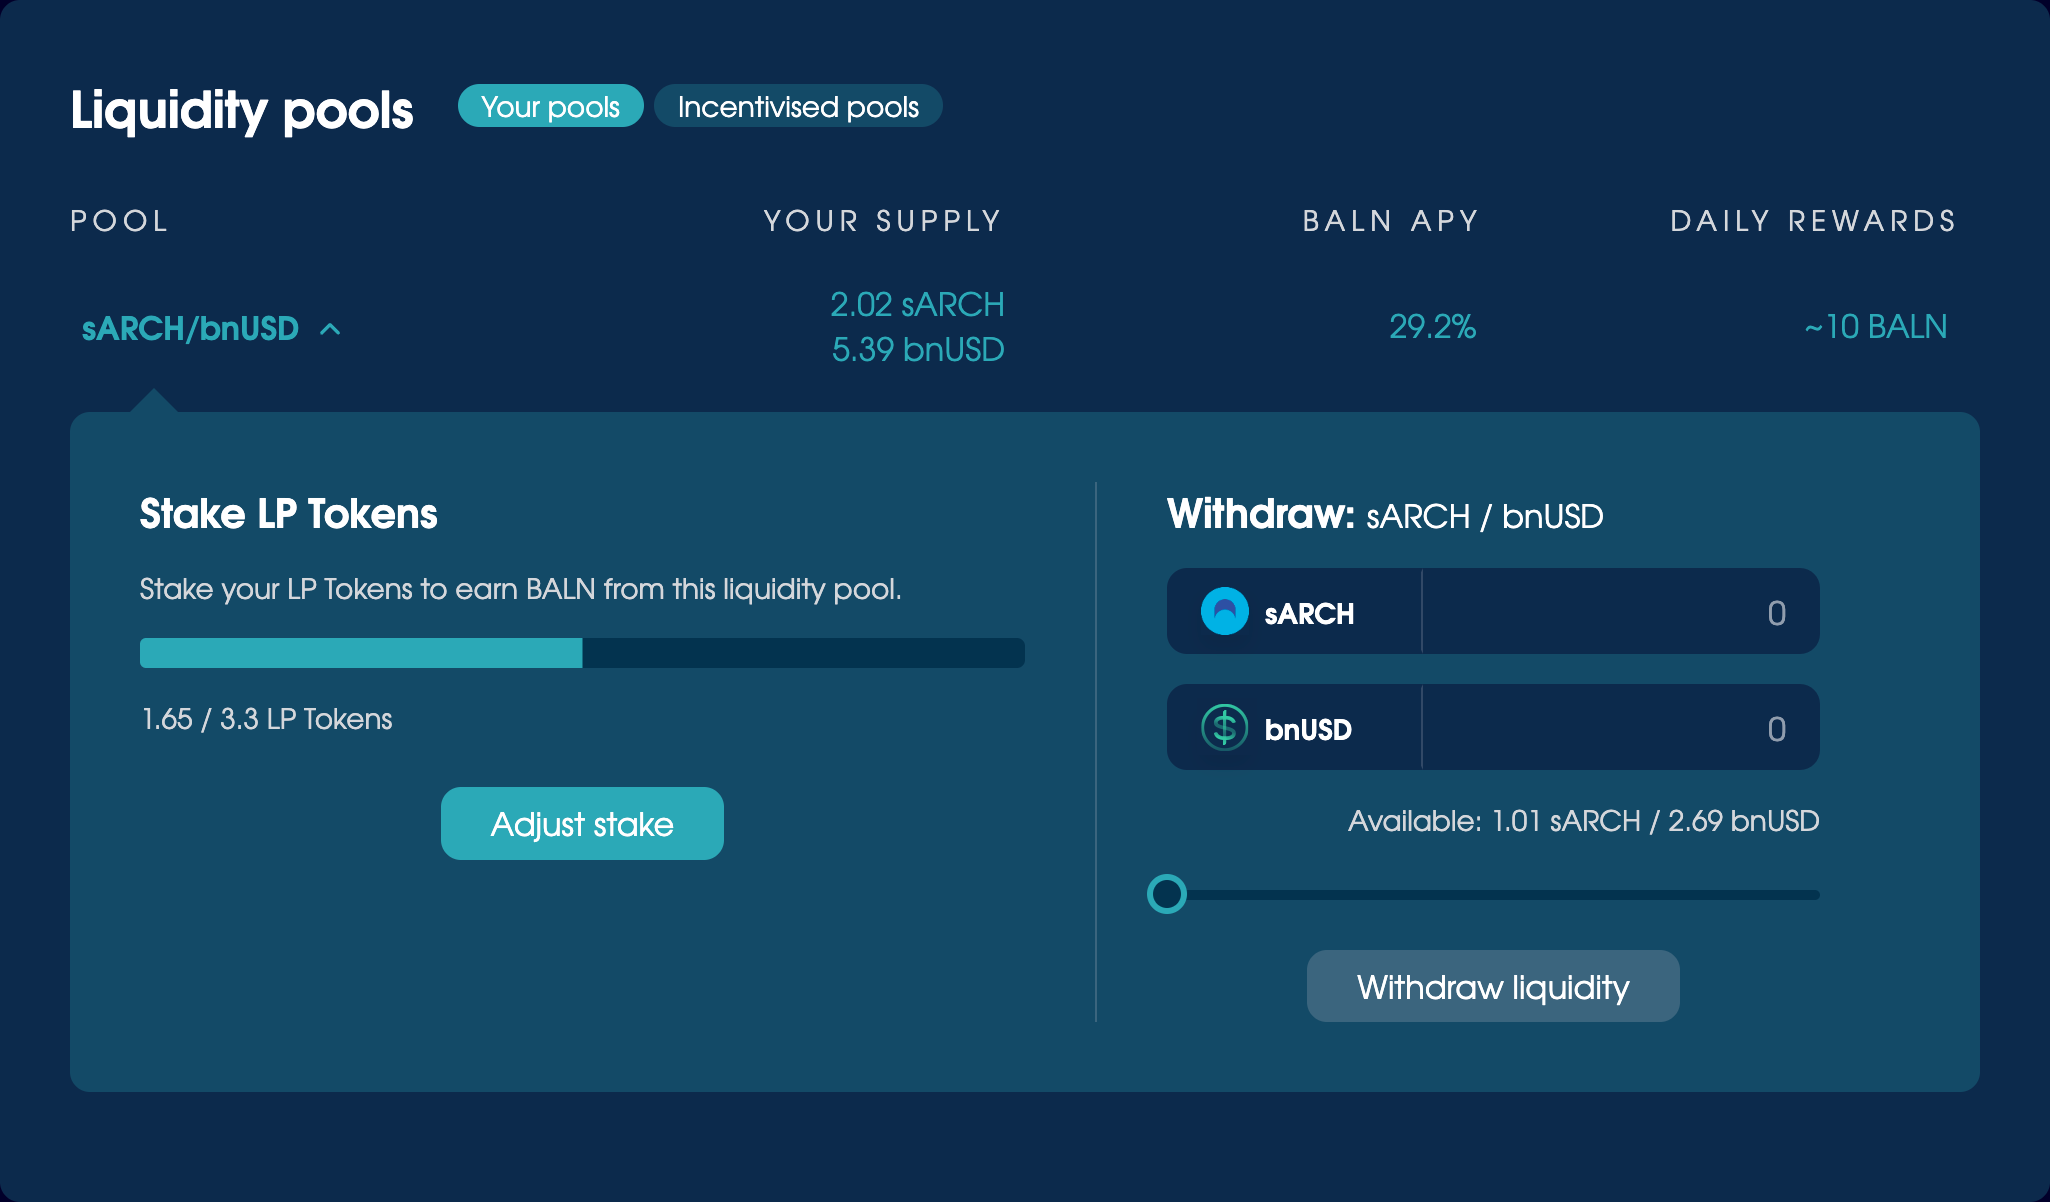 The Liquidity Pools section, set to 'Your pools' with a pool expanded to demonstrate how to stake LP Tokens